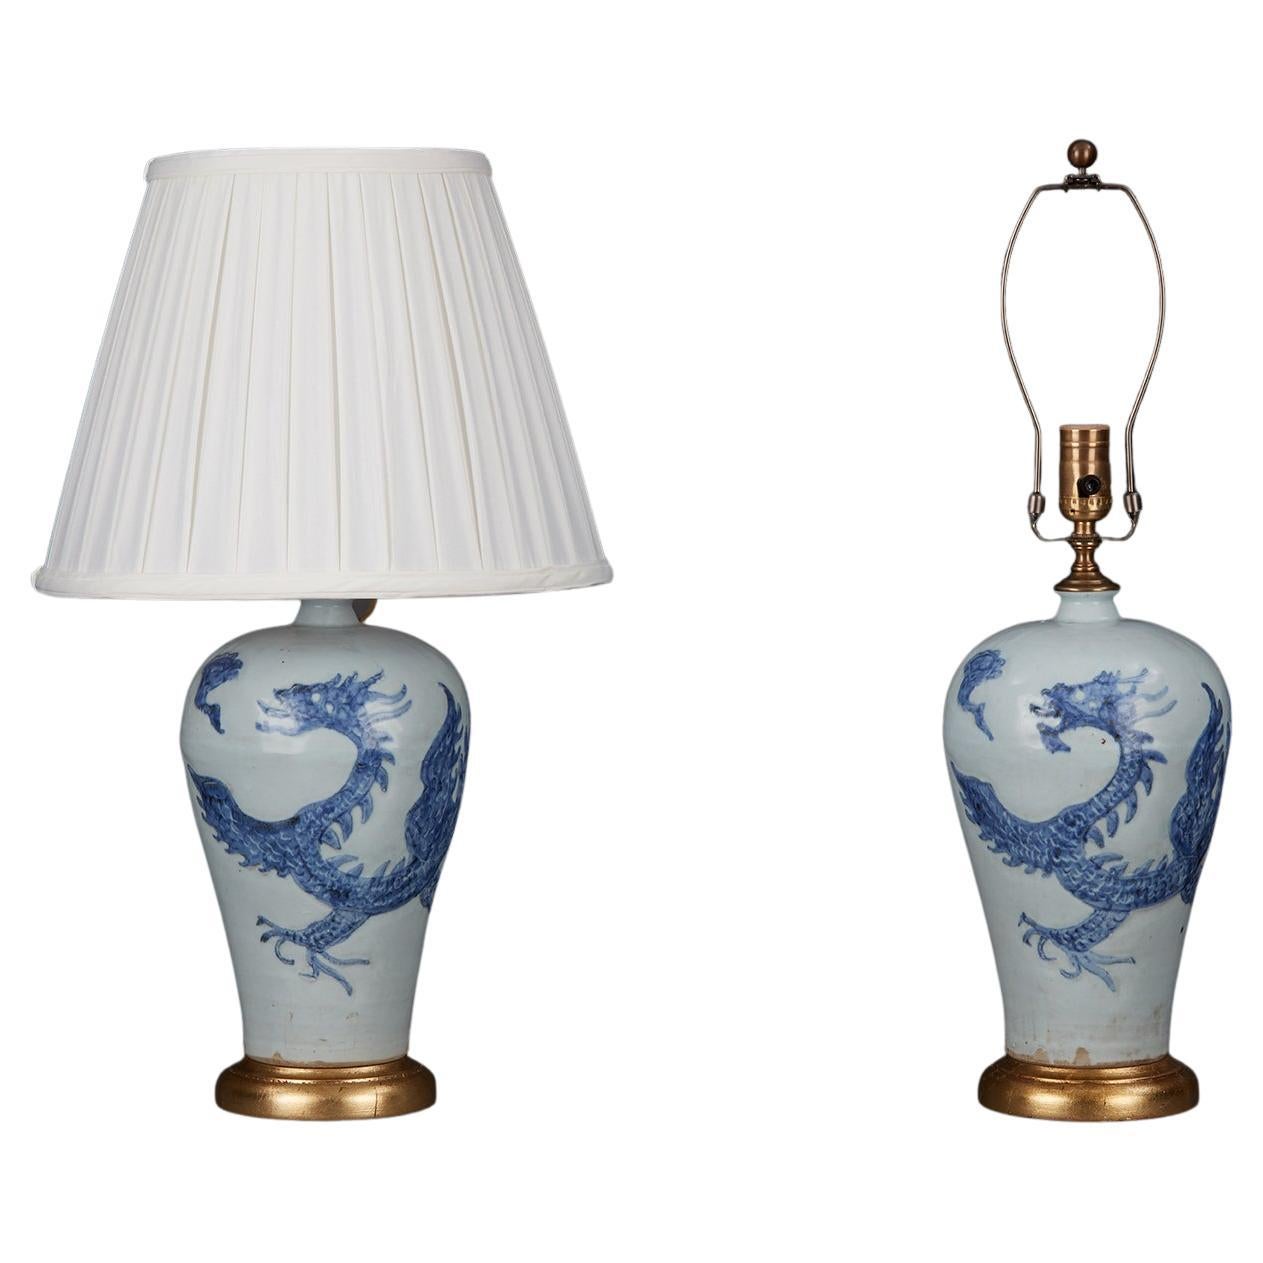 Pair Blue and White Chinese Porcelain Lamps w/ Dragon Motif 20th Century For Sale